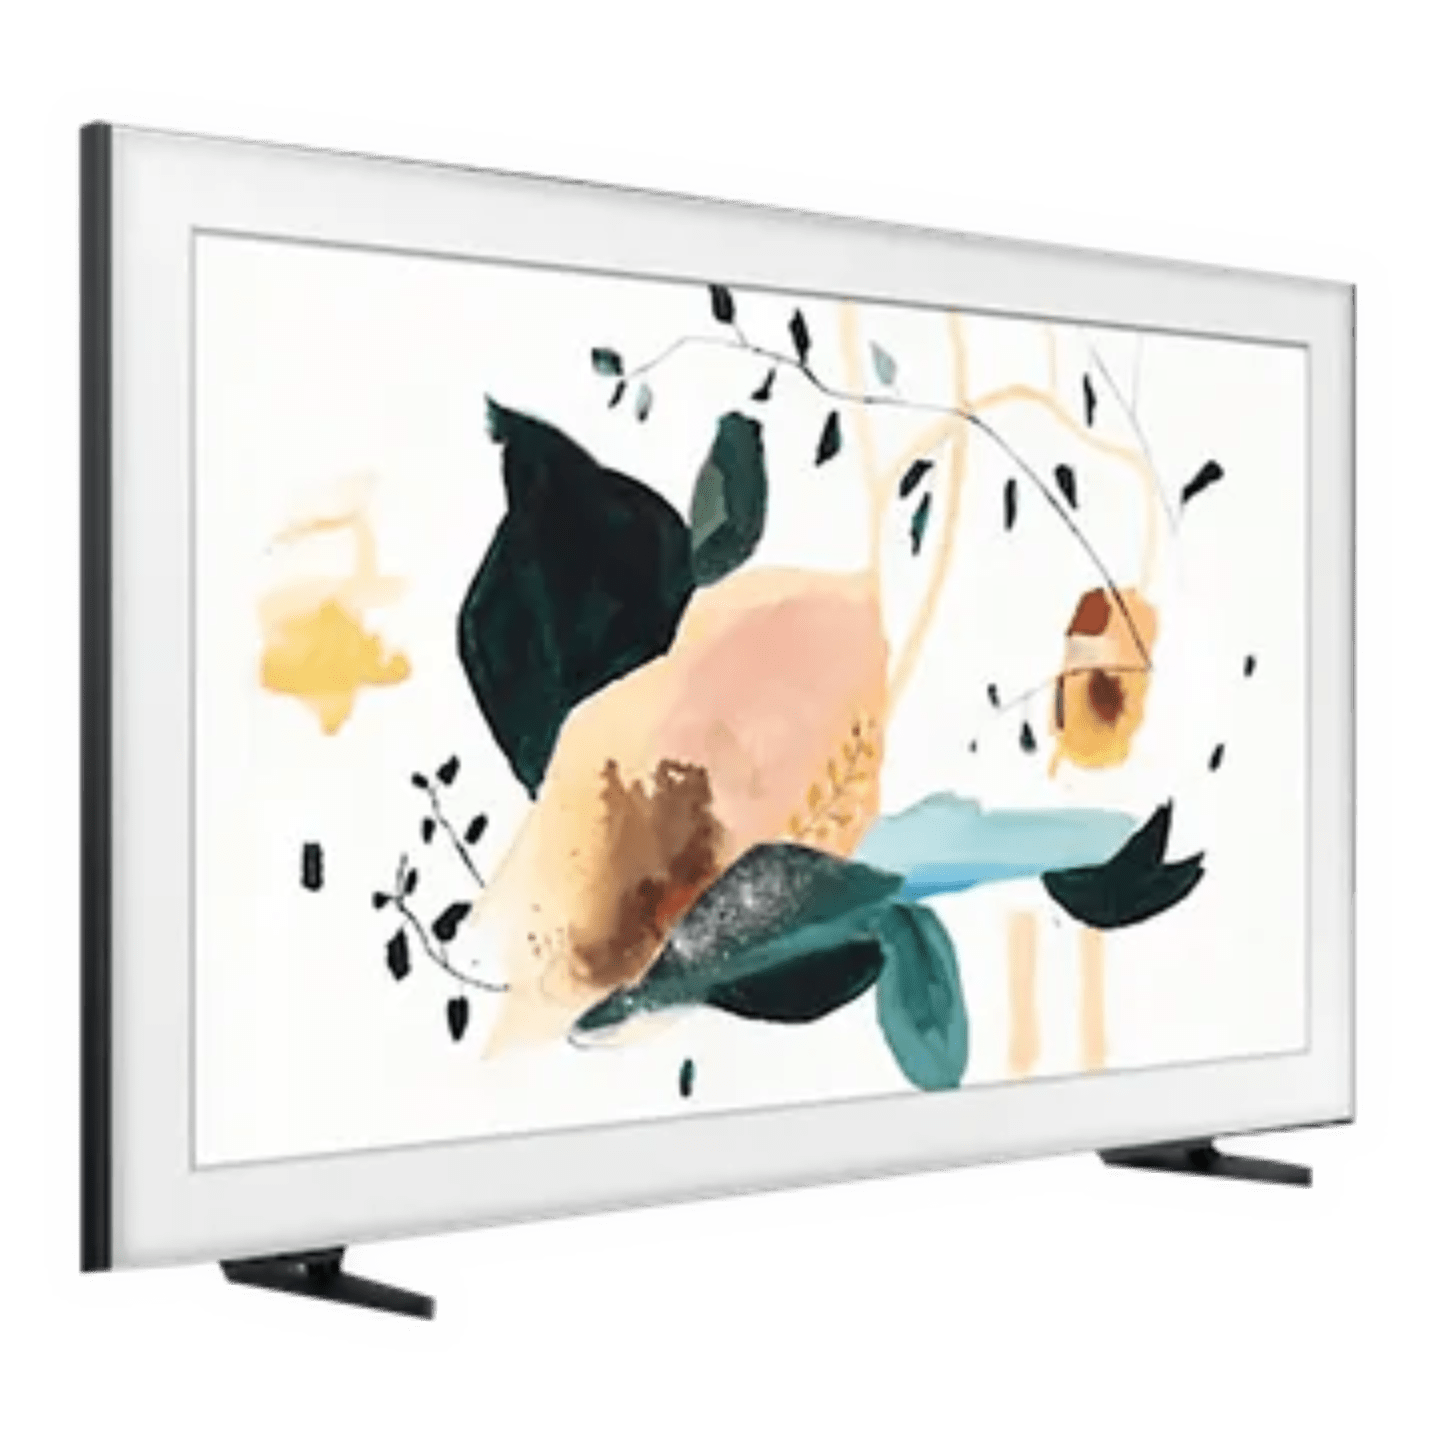 SAMSUNG LS Series 189 cm (75 inch) QLED 4K Ultra HD Tizen TV with Alexa Compatibility